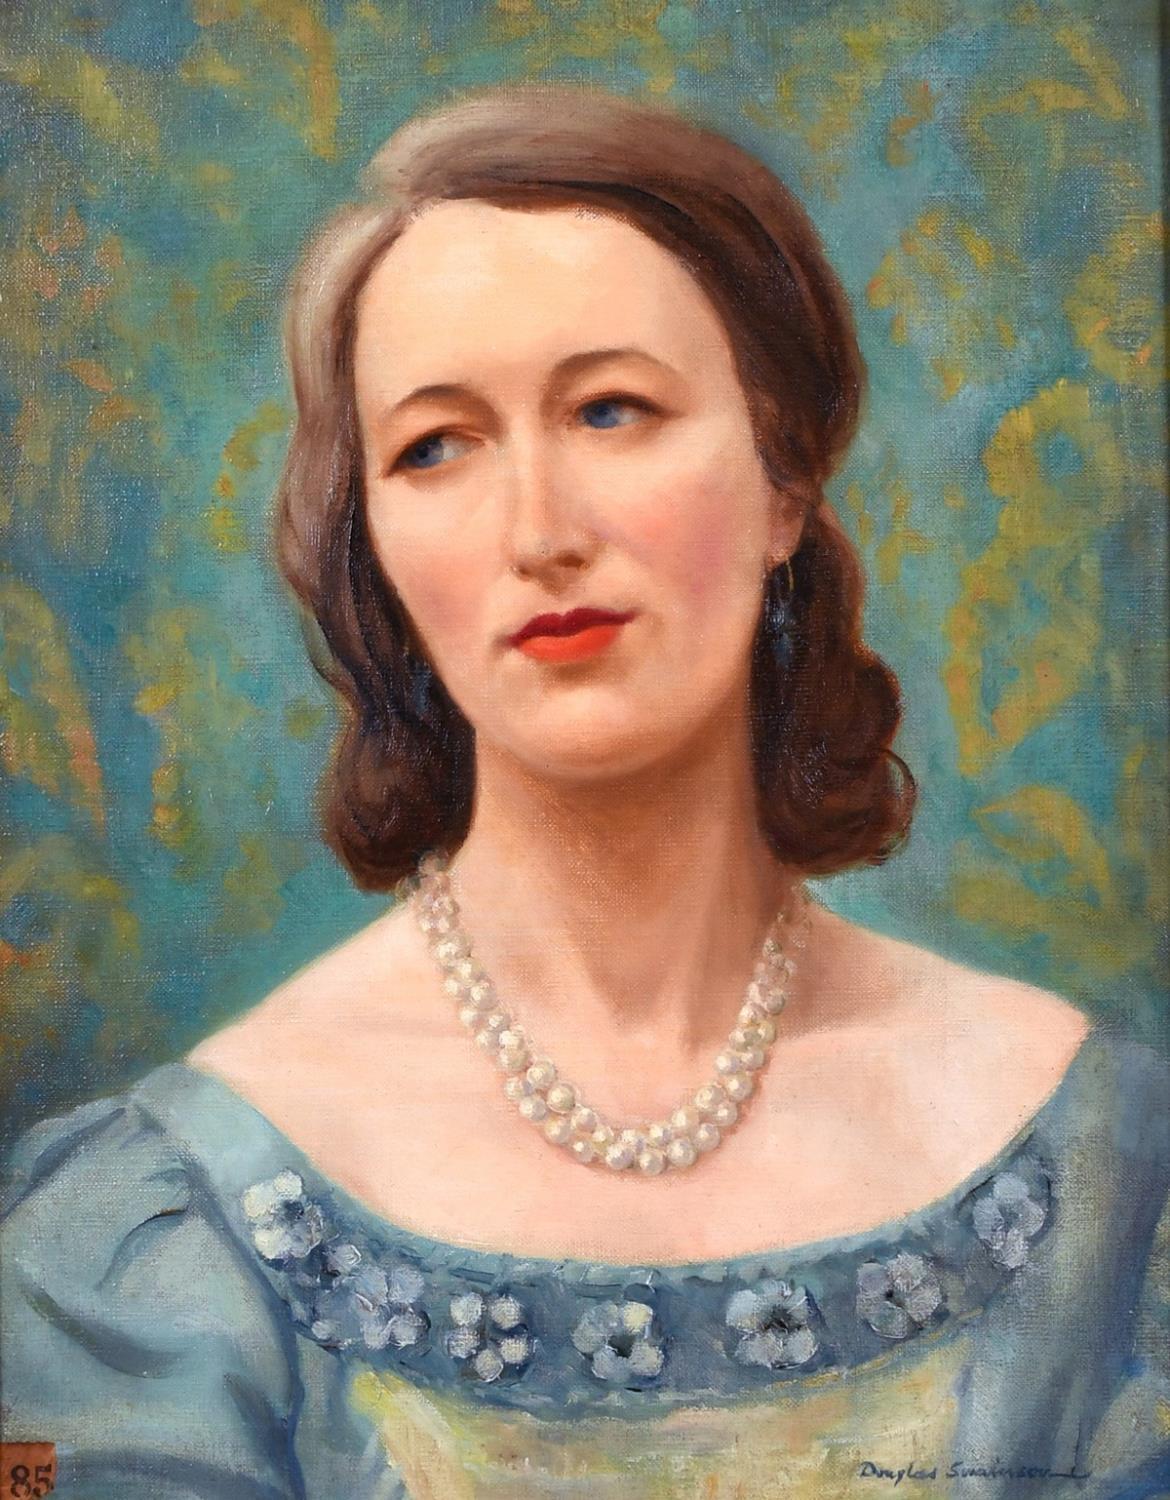 MID 20th CENTURY BRITISH OIL - PORTRAIT OF A LADY IN PEARL NECKLACE - TEAL GREEN